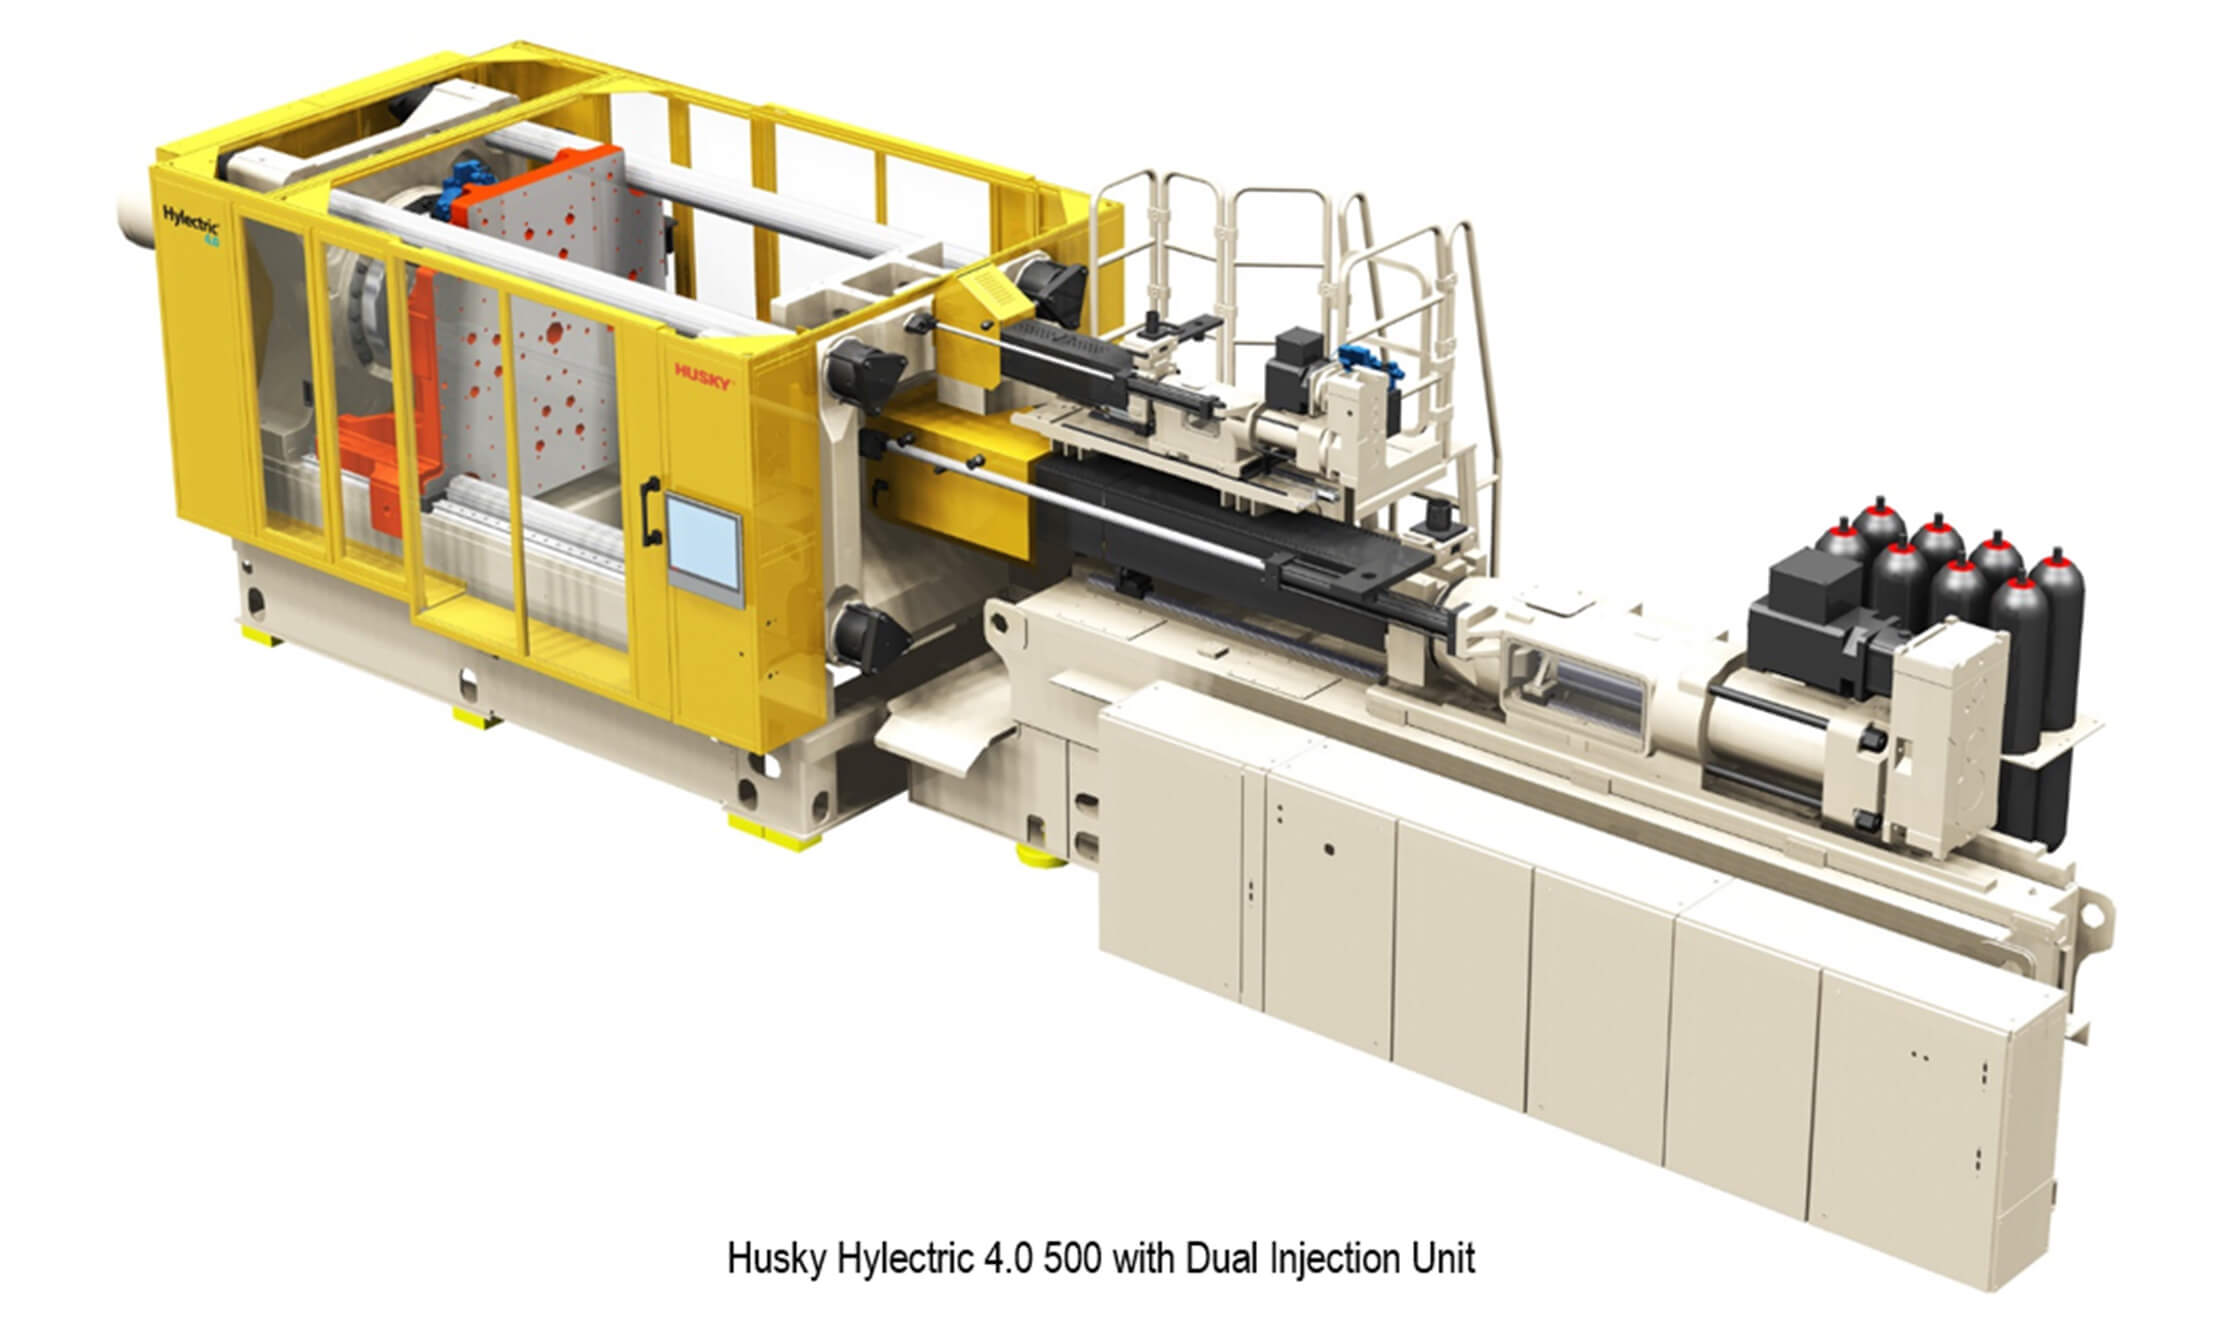 Image of the Husky injection molding system: Hylectric 4.0 500 with Dual Injection Unit